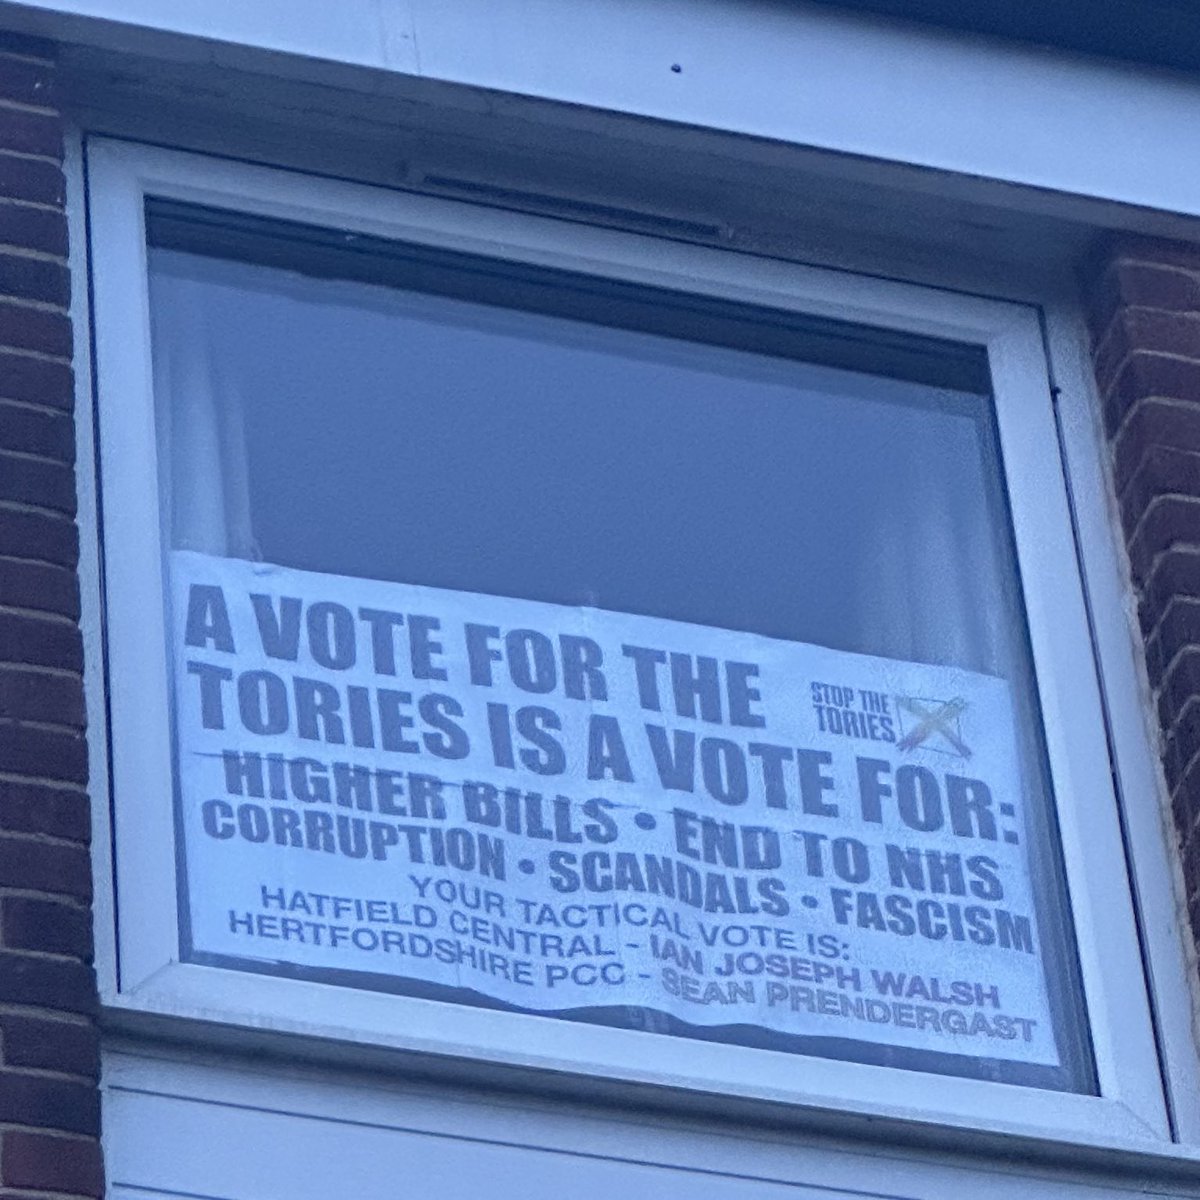 Using my window across the road from a polling station to #GTTO #ToriesUnfitToGovern #ToriesOut #SunakOut #ToriesCorruptToTheCore #ToriesLootedAndDestroyedOurCountry